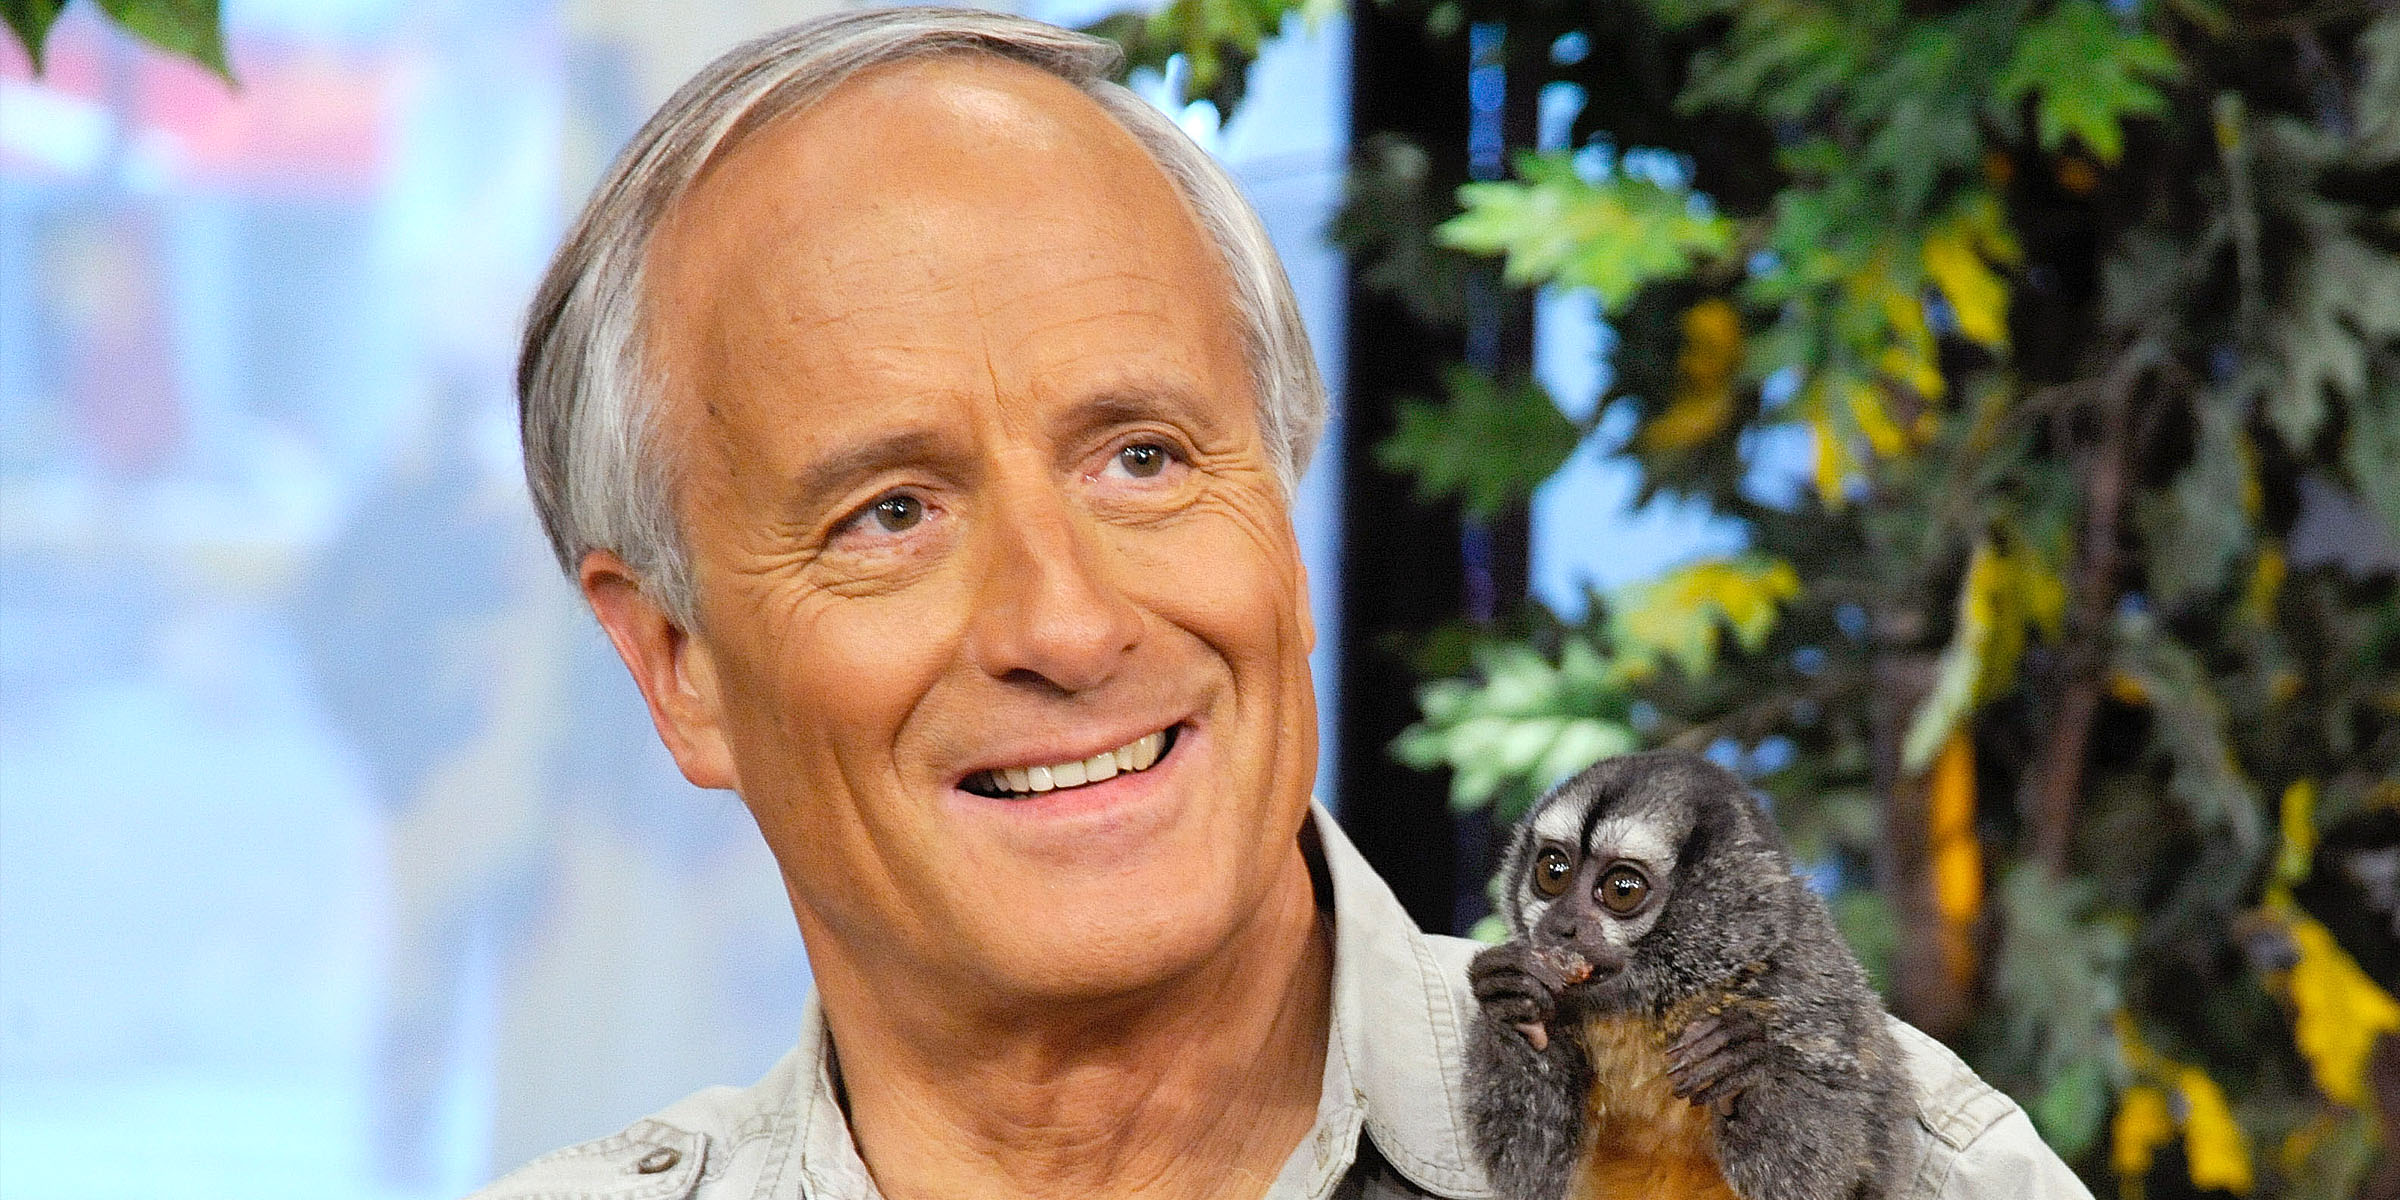 Jack Hanna | Source: Getty Images